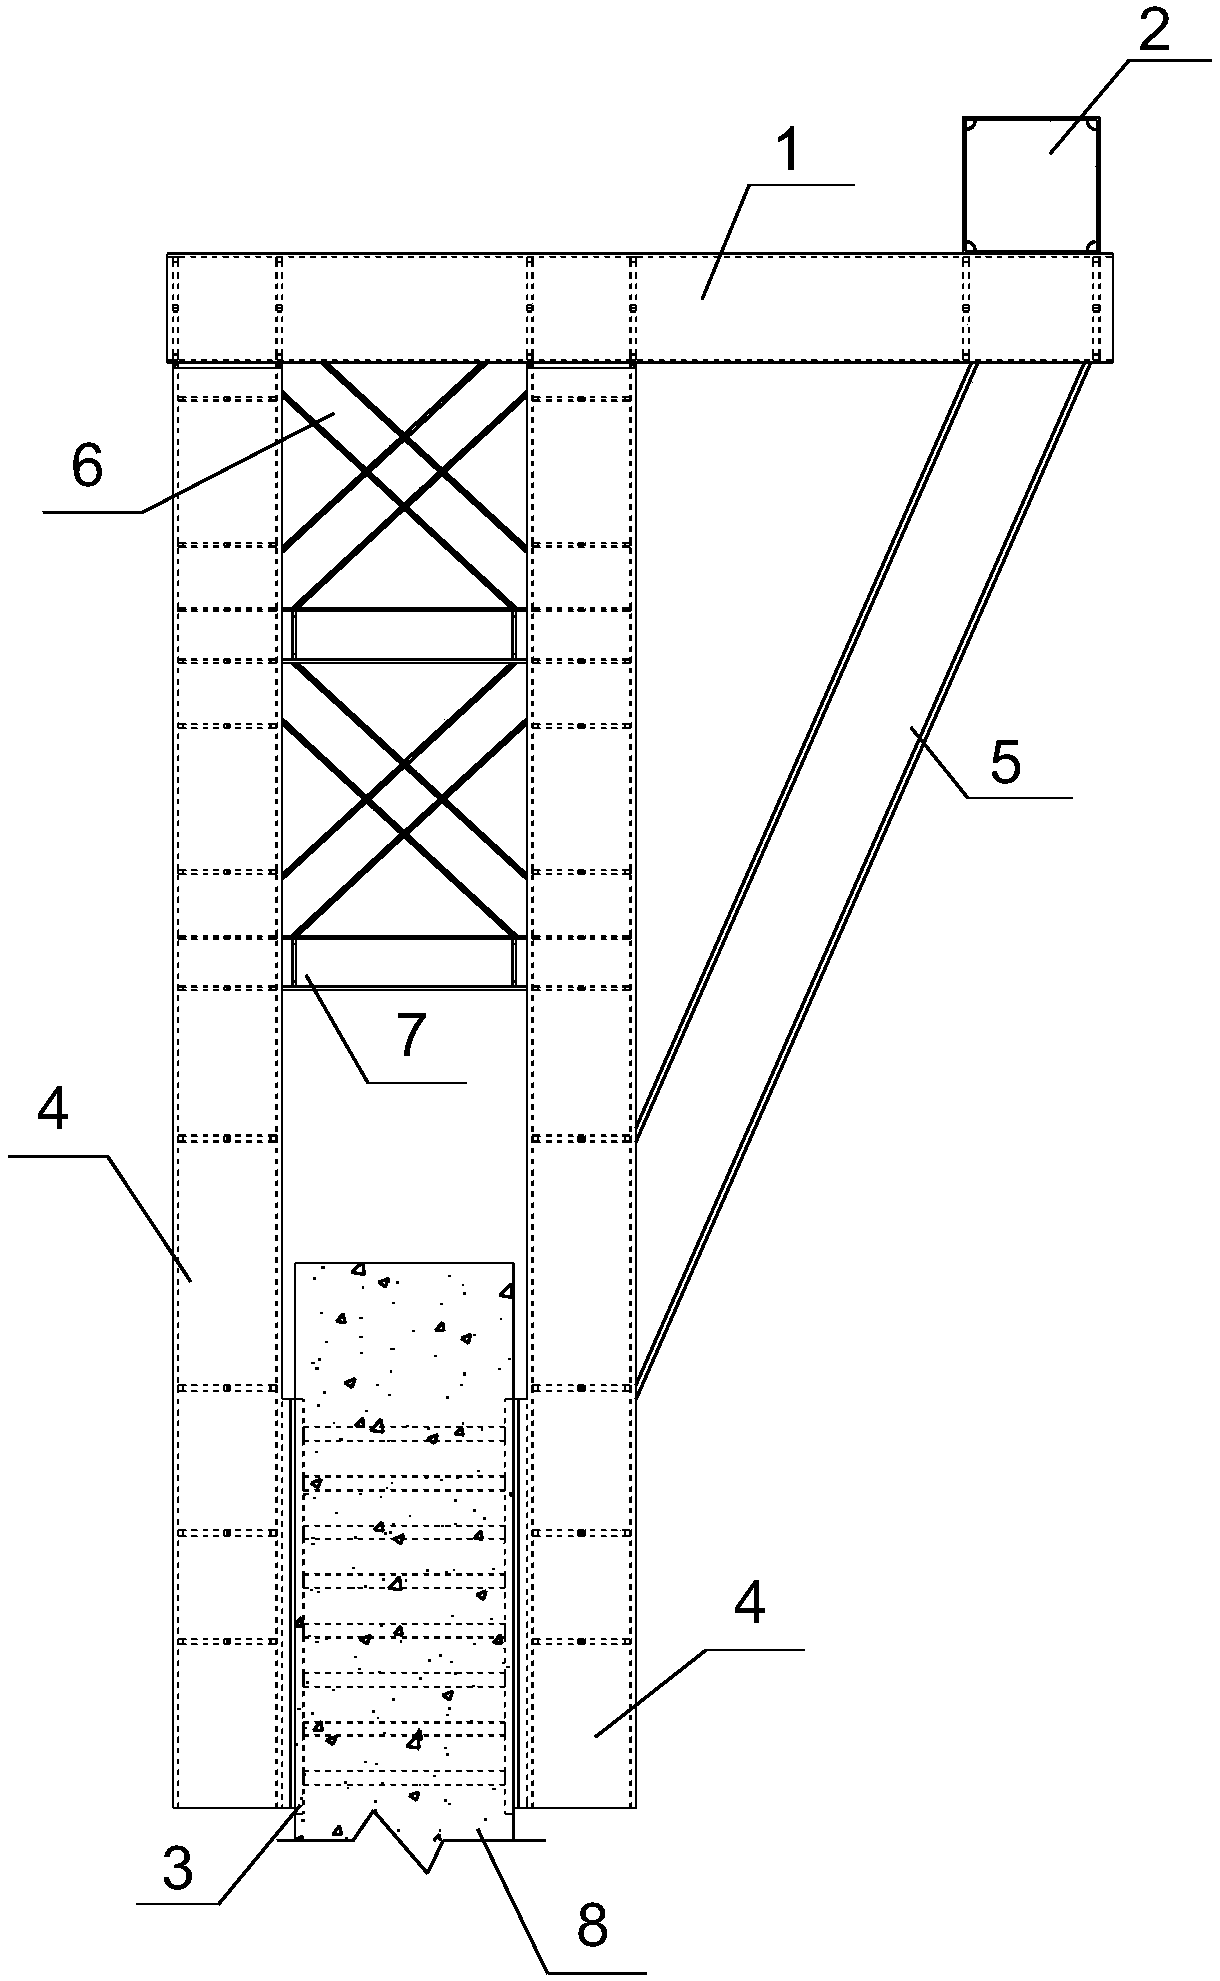 Laterally-mounted parallely-row carrying pole type lifting frame based on concrete independent beam